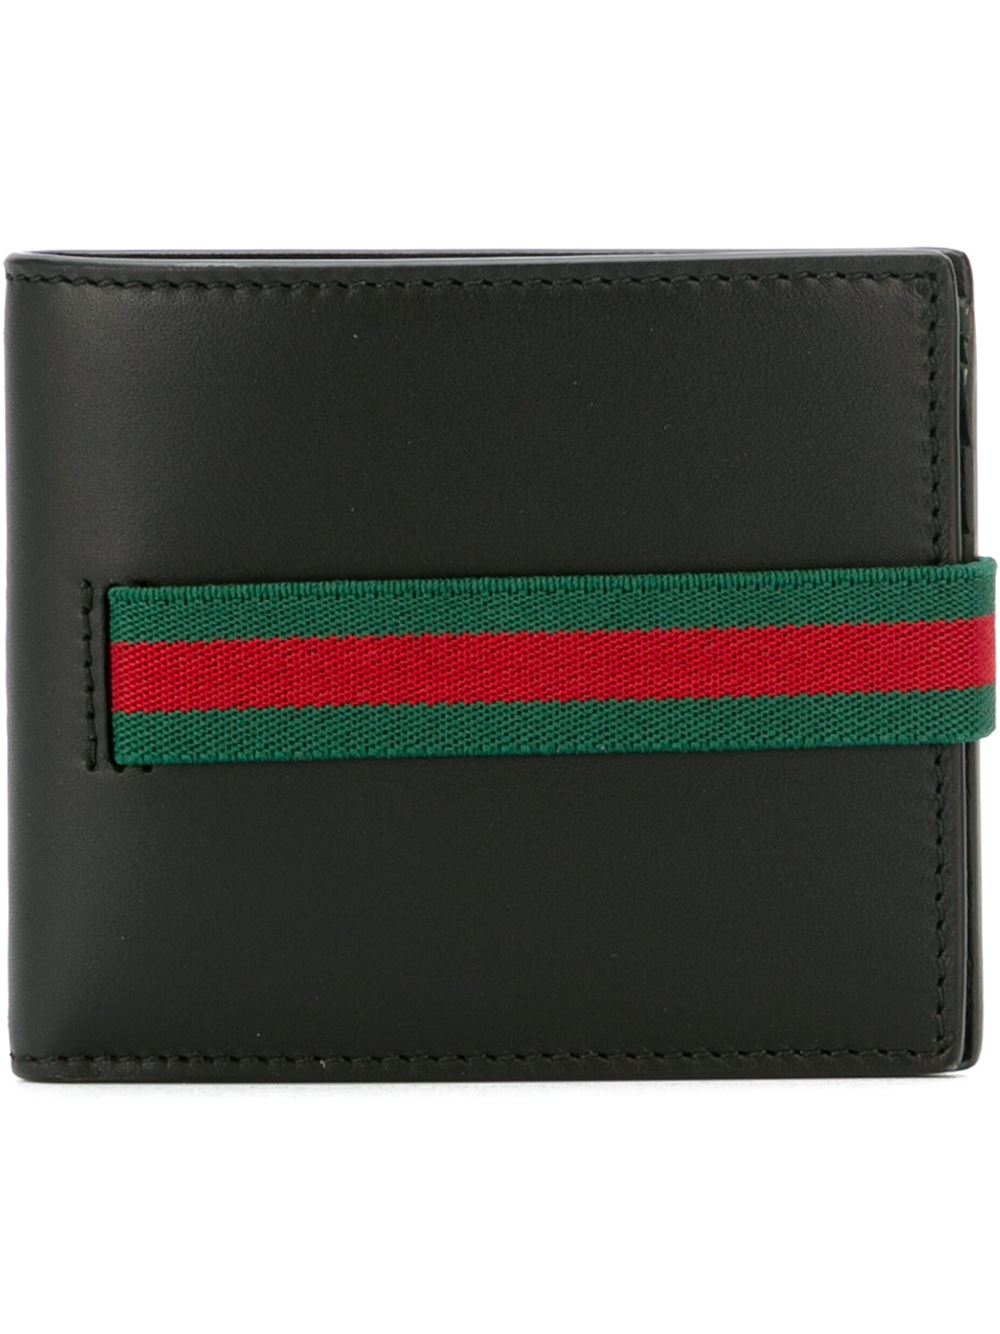  Gucci  Leather Elastic Wallet  in Red for Men  Lyst